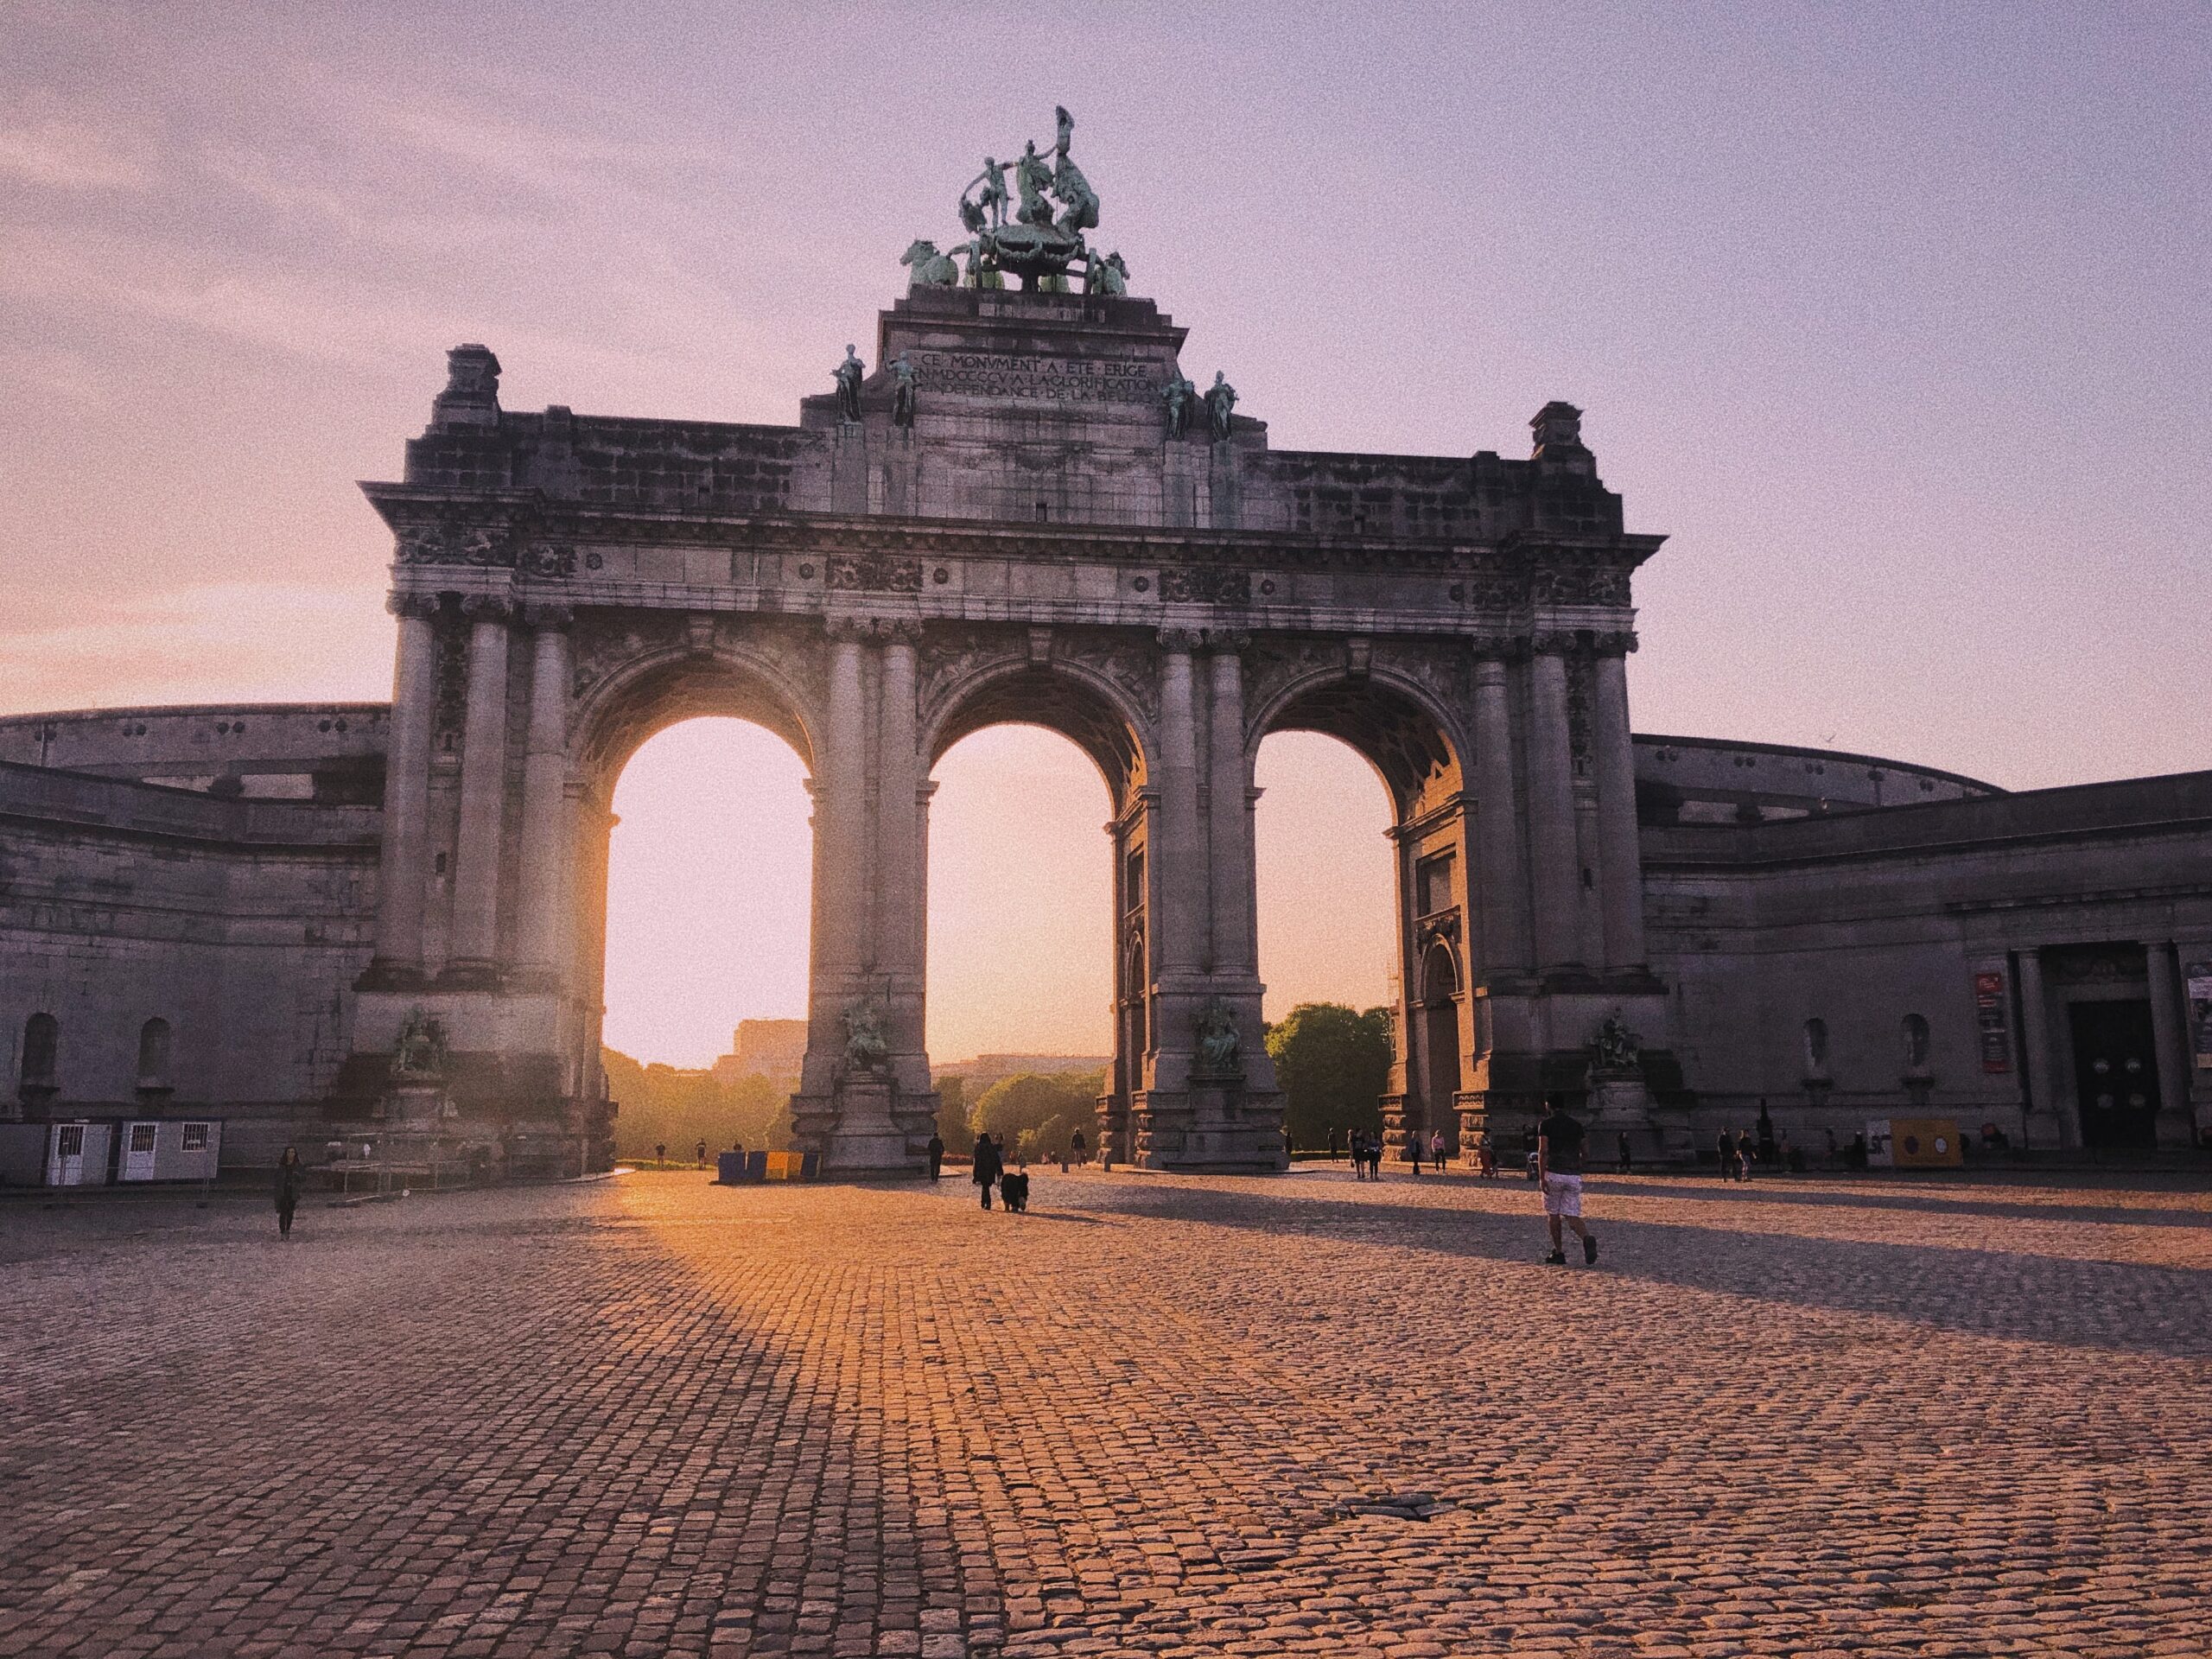 Bruxelles monument at sunset and a cobbled street